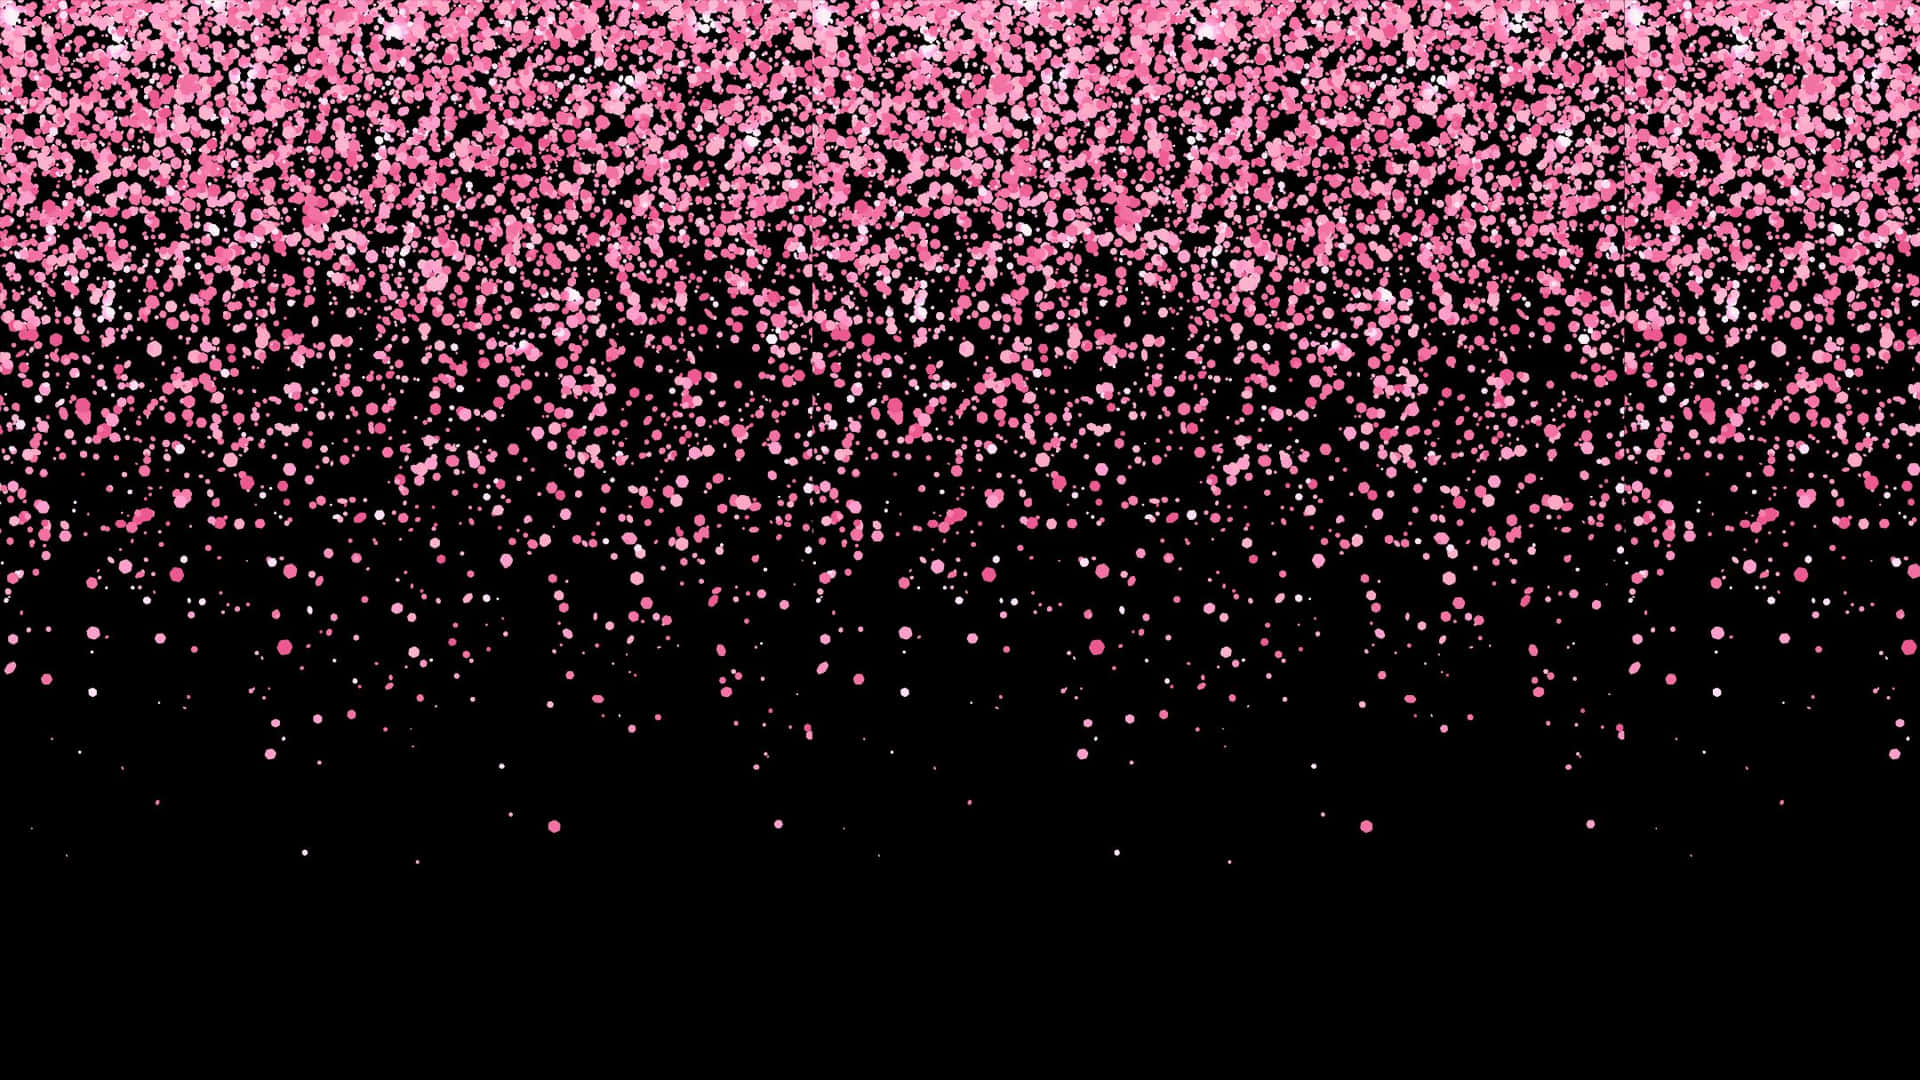 "Glittery and girly pink background for a fun and playful look"